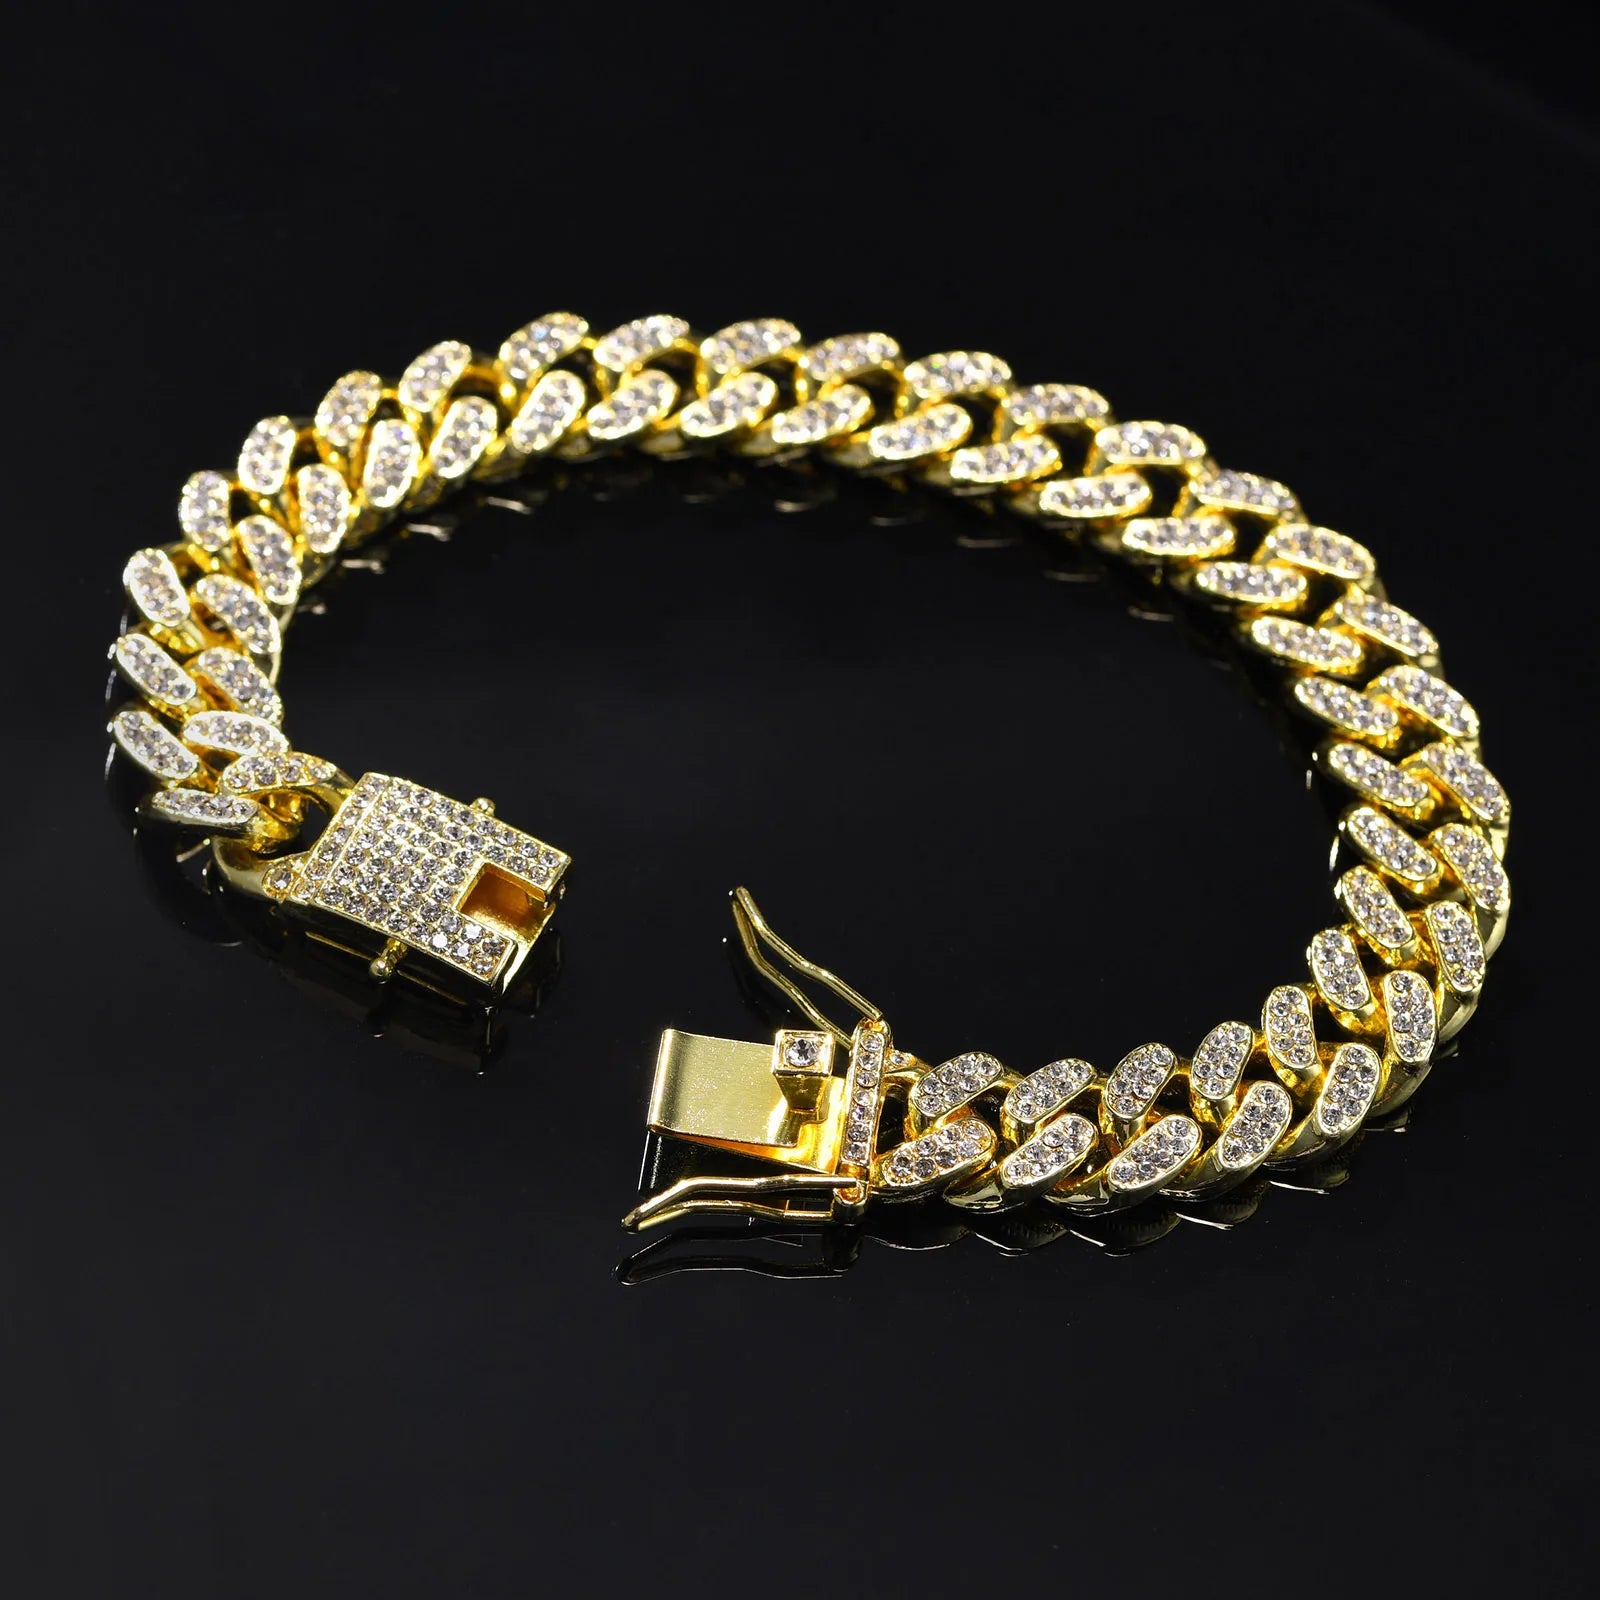 12Mm Bold Cuban Chain Bracelets for Men,Full Iced Out Rhinestones Links, Bling Crystal Curb Chain Punk Hiphop Bracelet